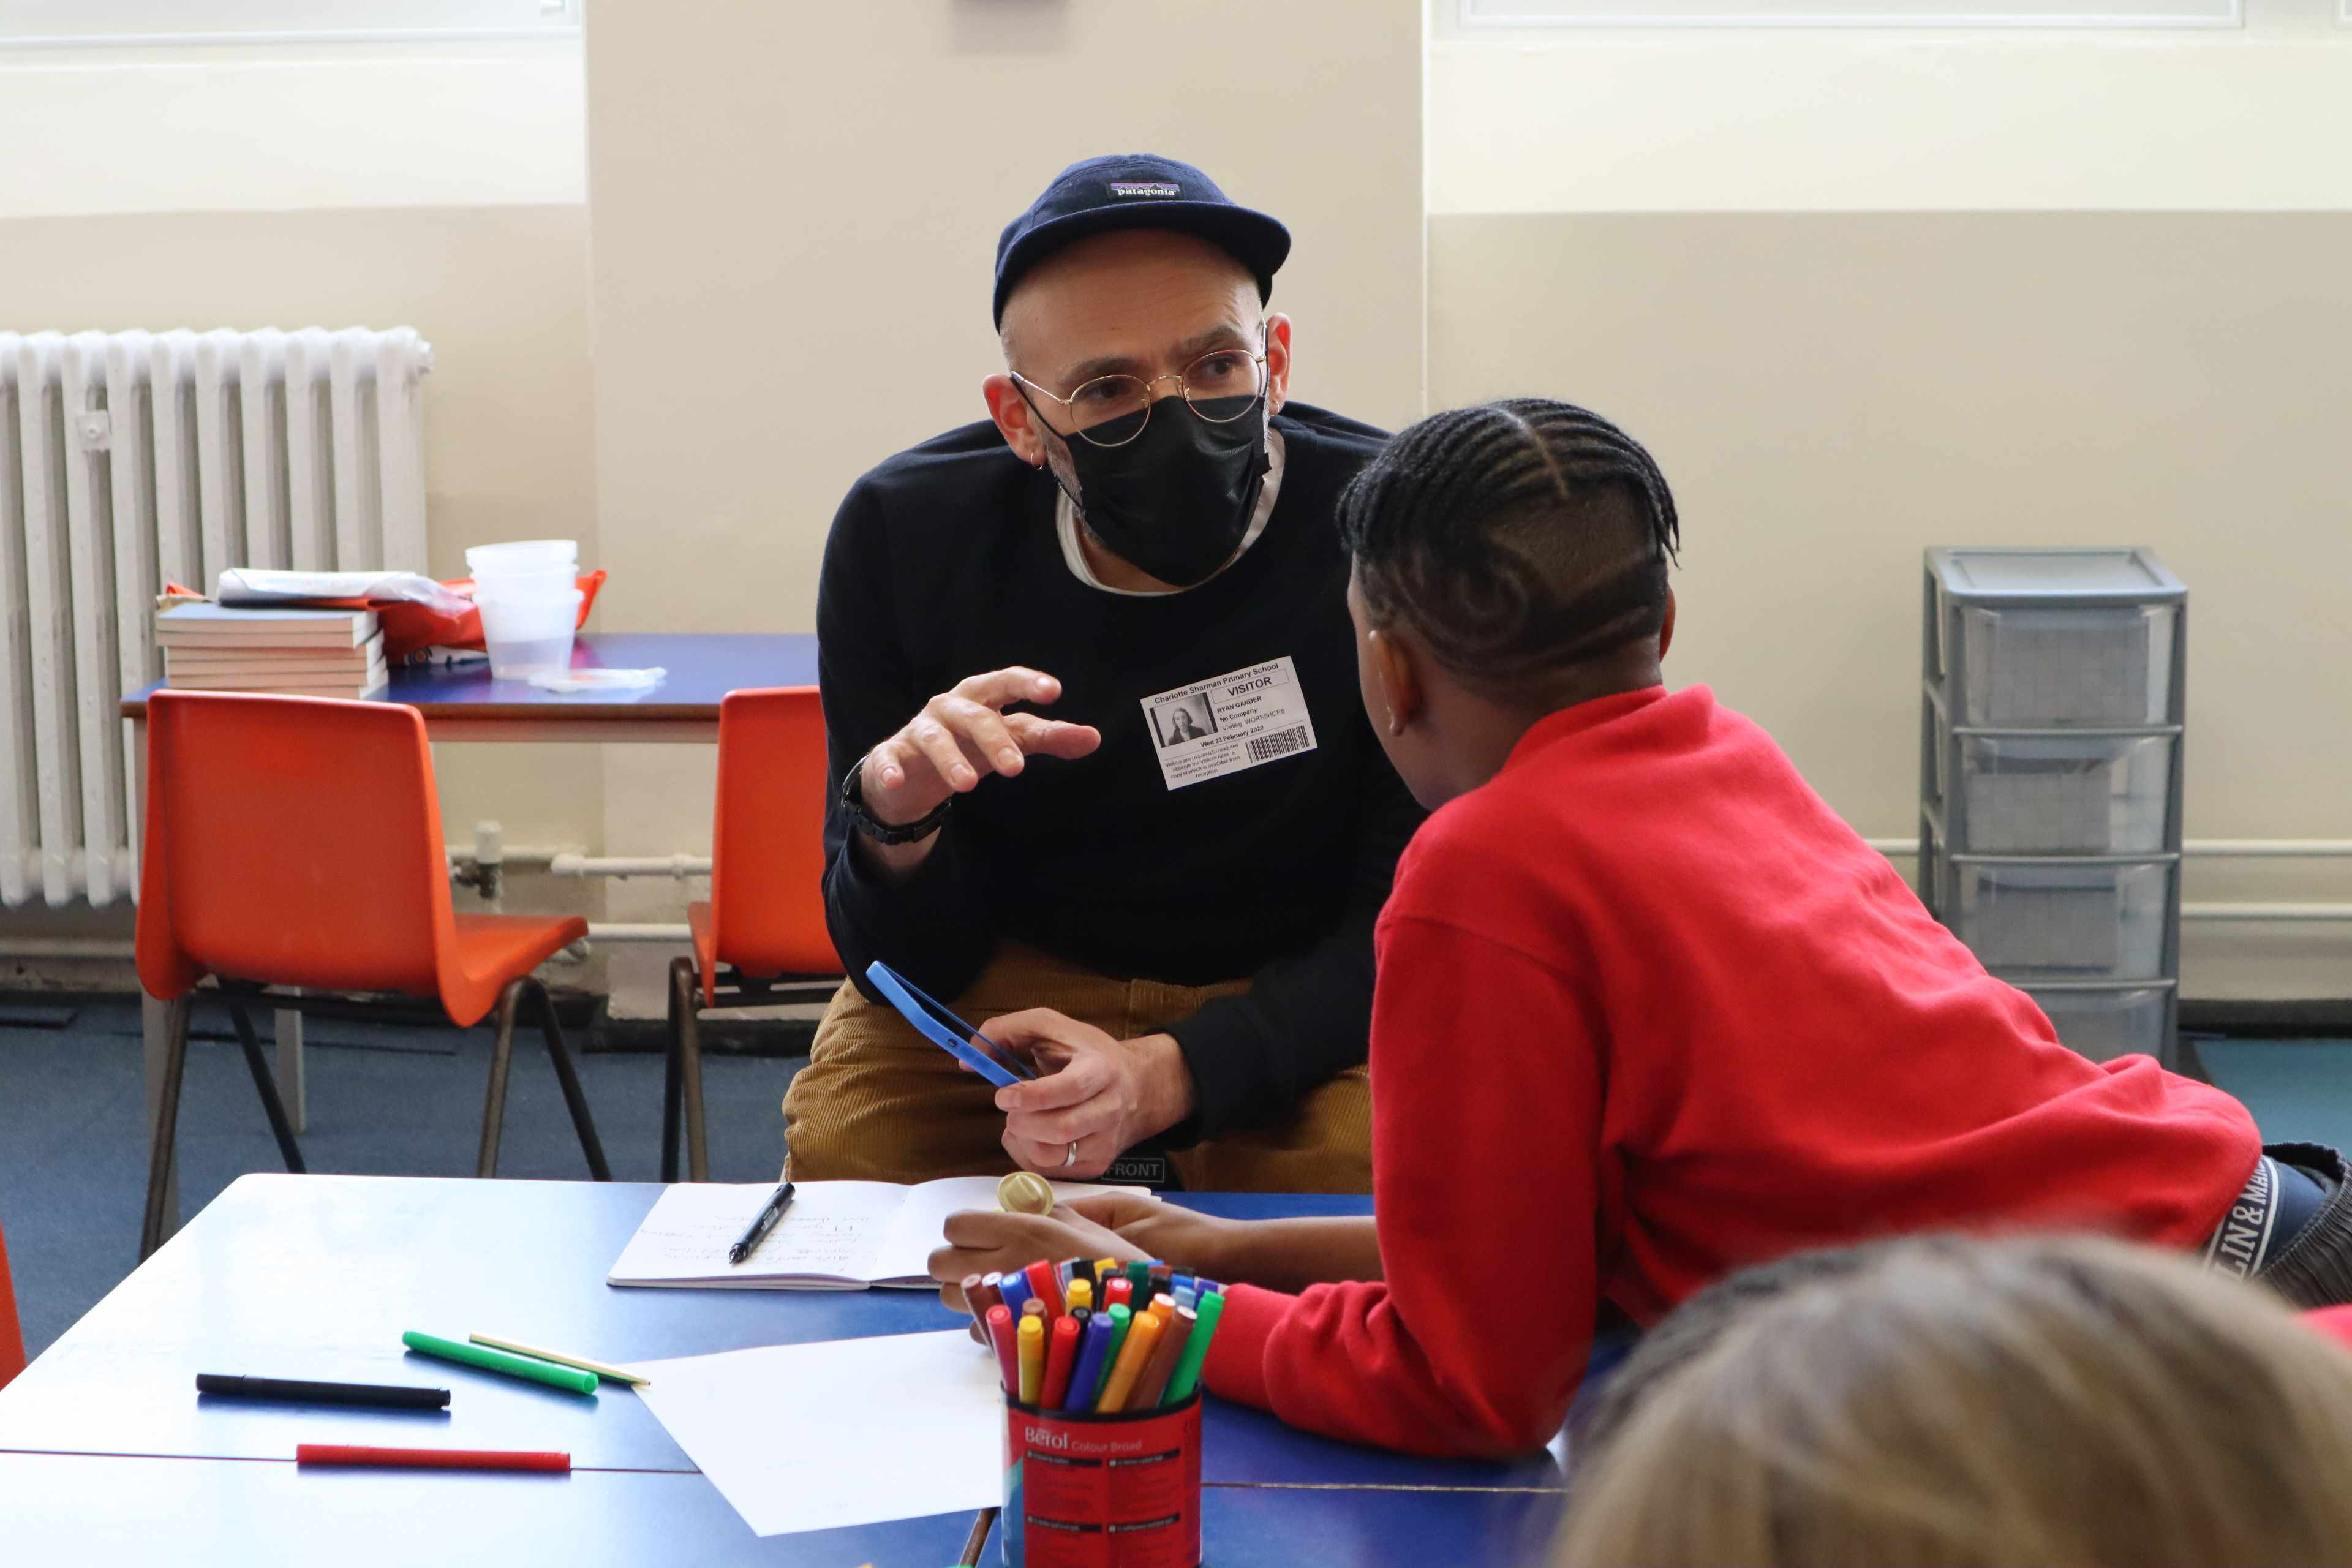 A primary school child wearing a red sweatshirt facing away from the camera and leaning across a table, talking to artist Ryan Gander who is wearing a black cap, glasses and a face mask.